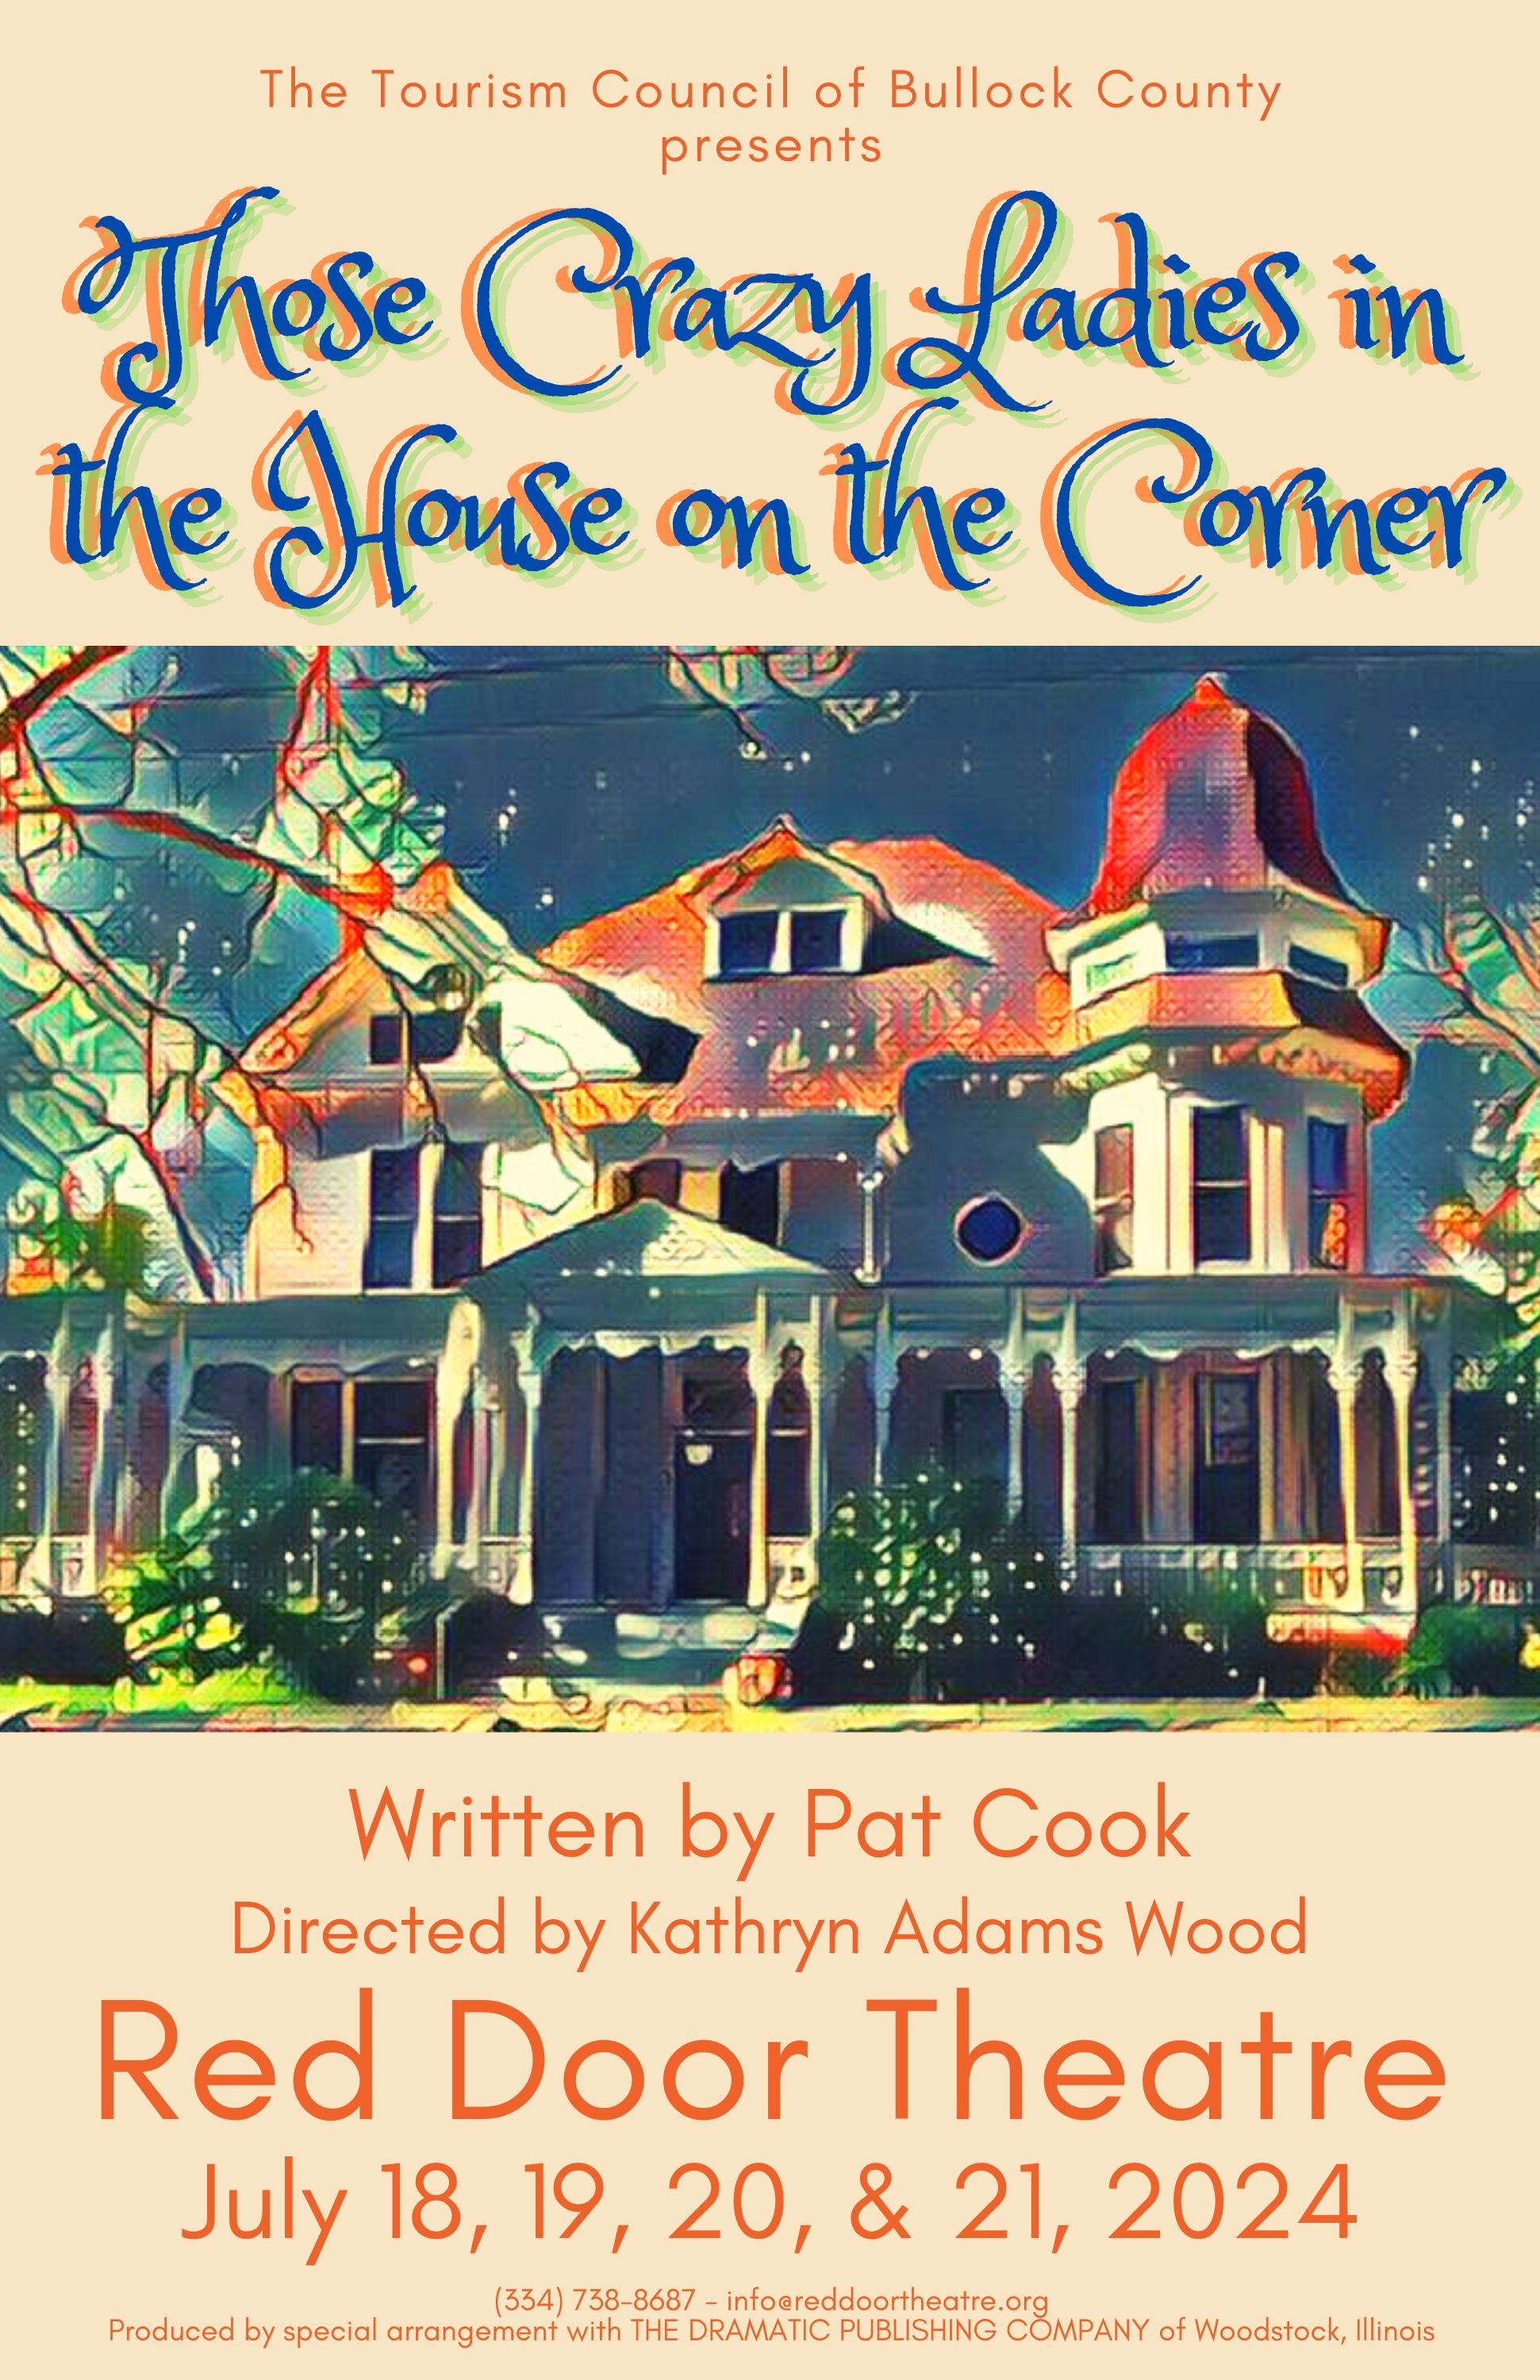 "Those Crazy Ladies in the House on the Corner," a play by Pat Cook